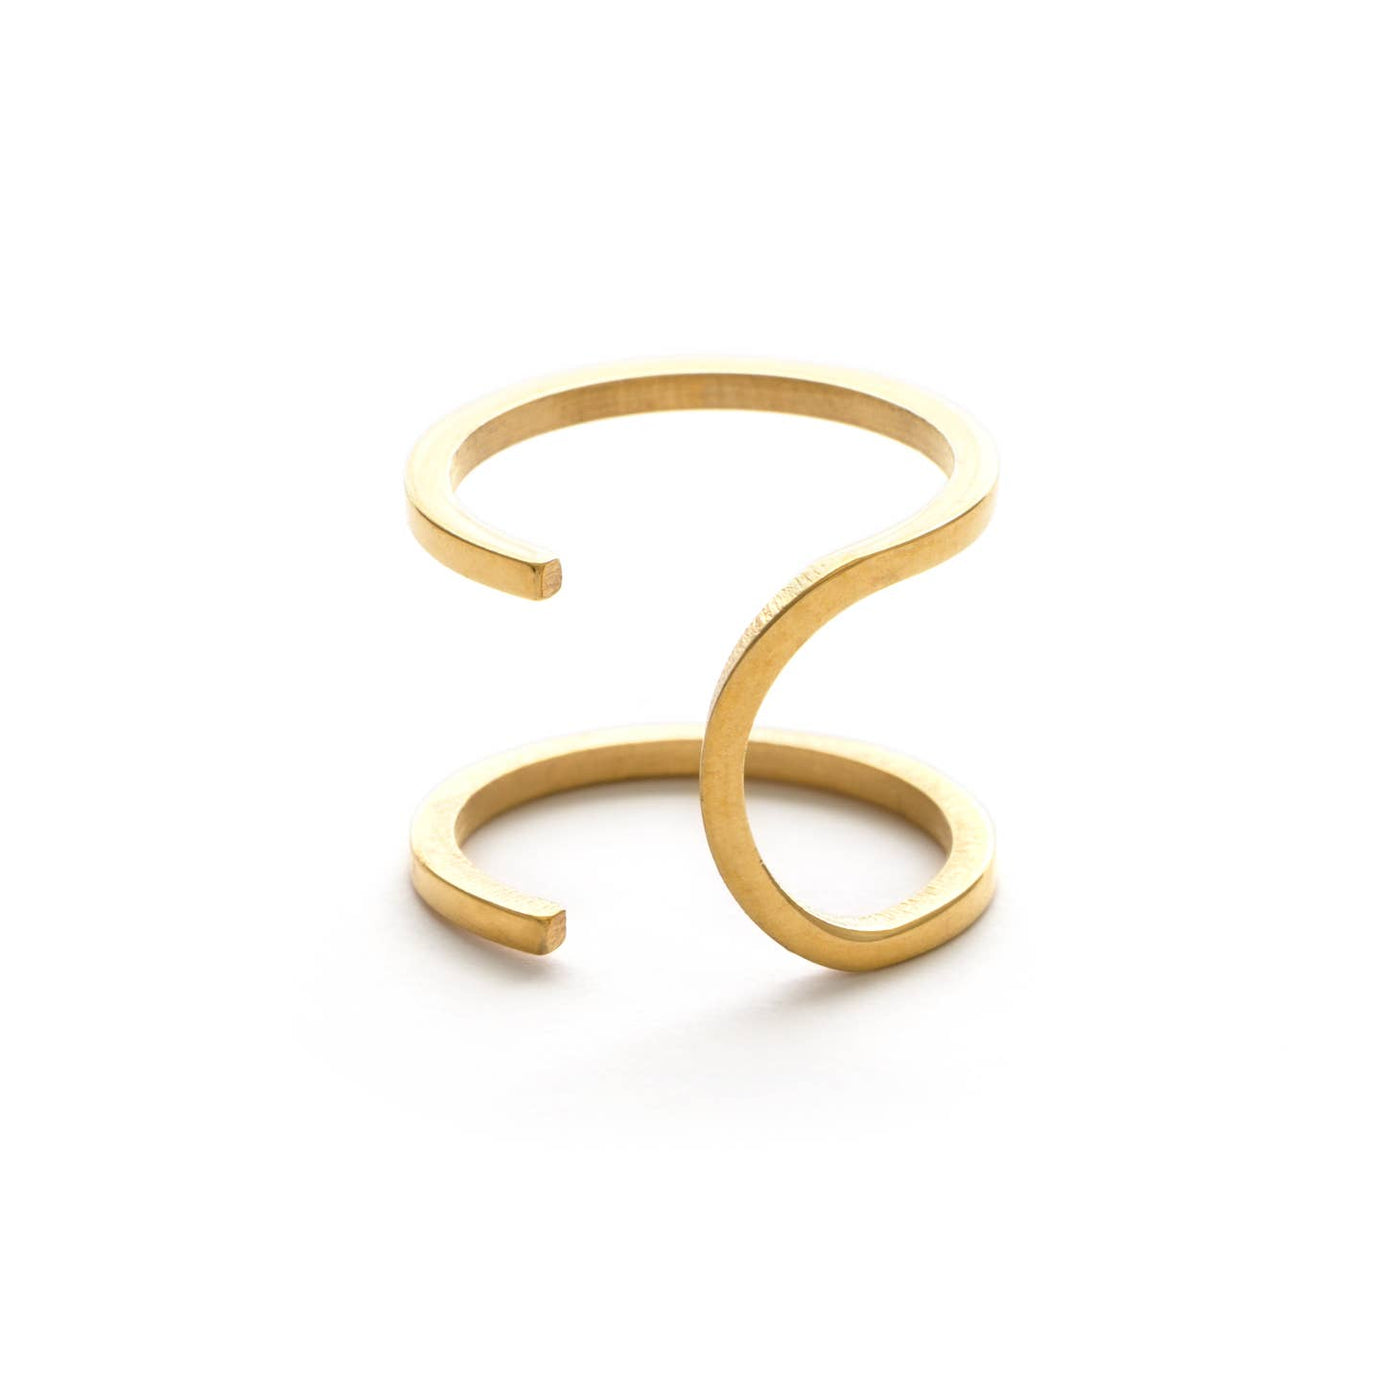 wrap ring made of gold plated brass